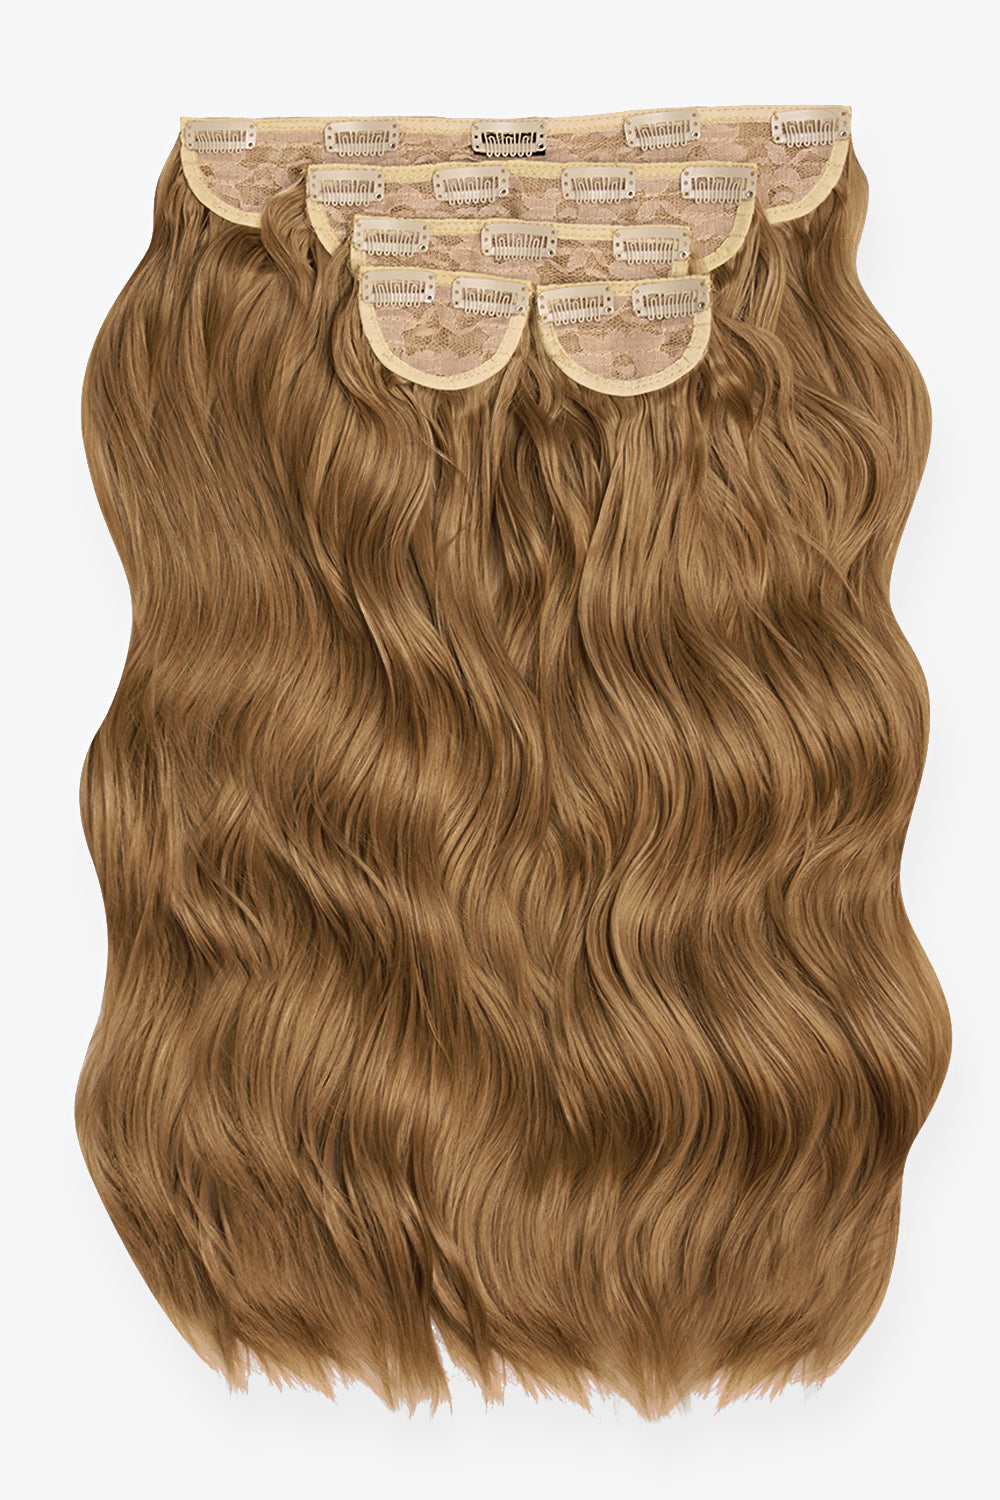 Super Thick 22’’ 5 Piece Brushed Out Wave Clip In Hair Extensions - Harvest Blonde